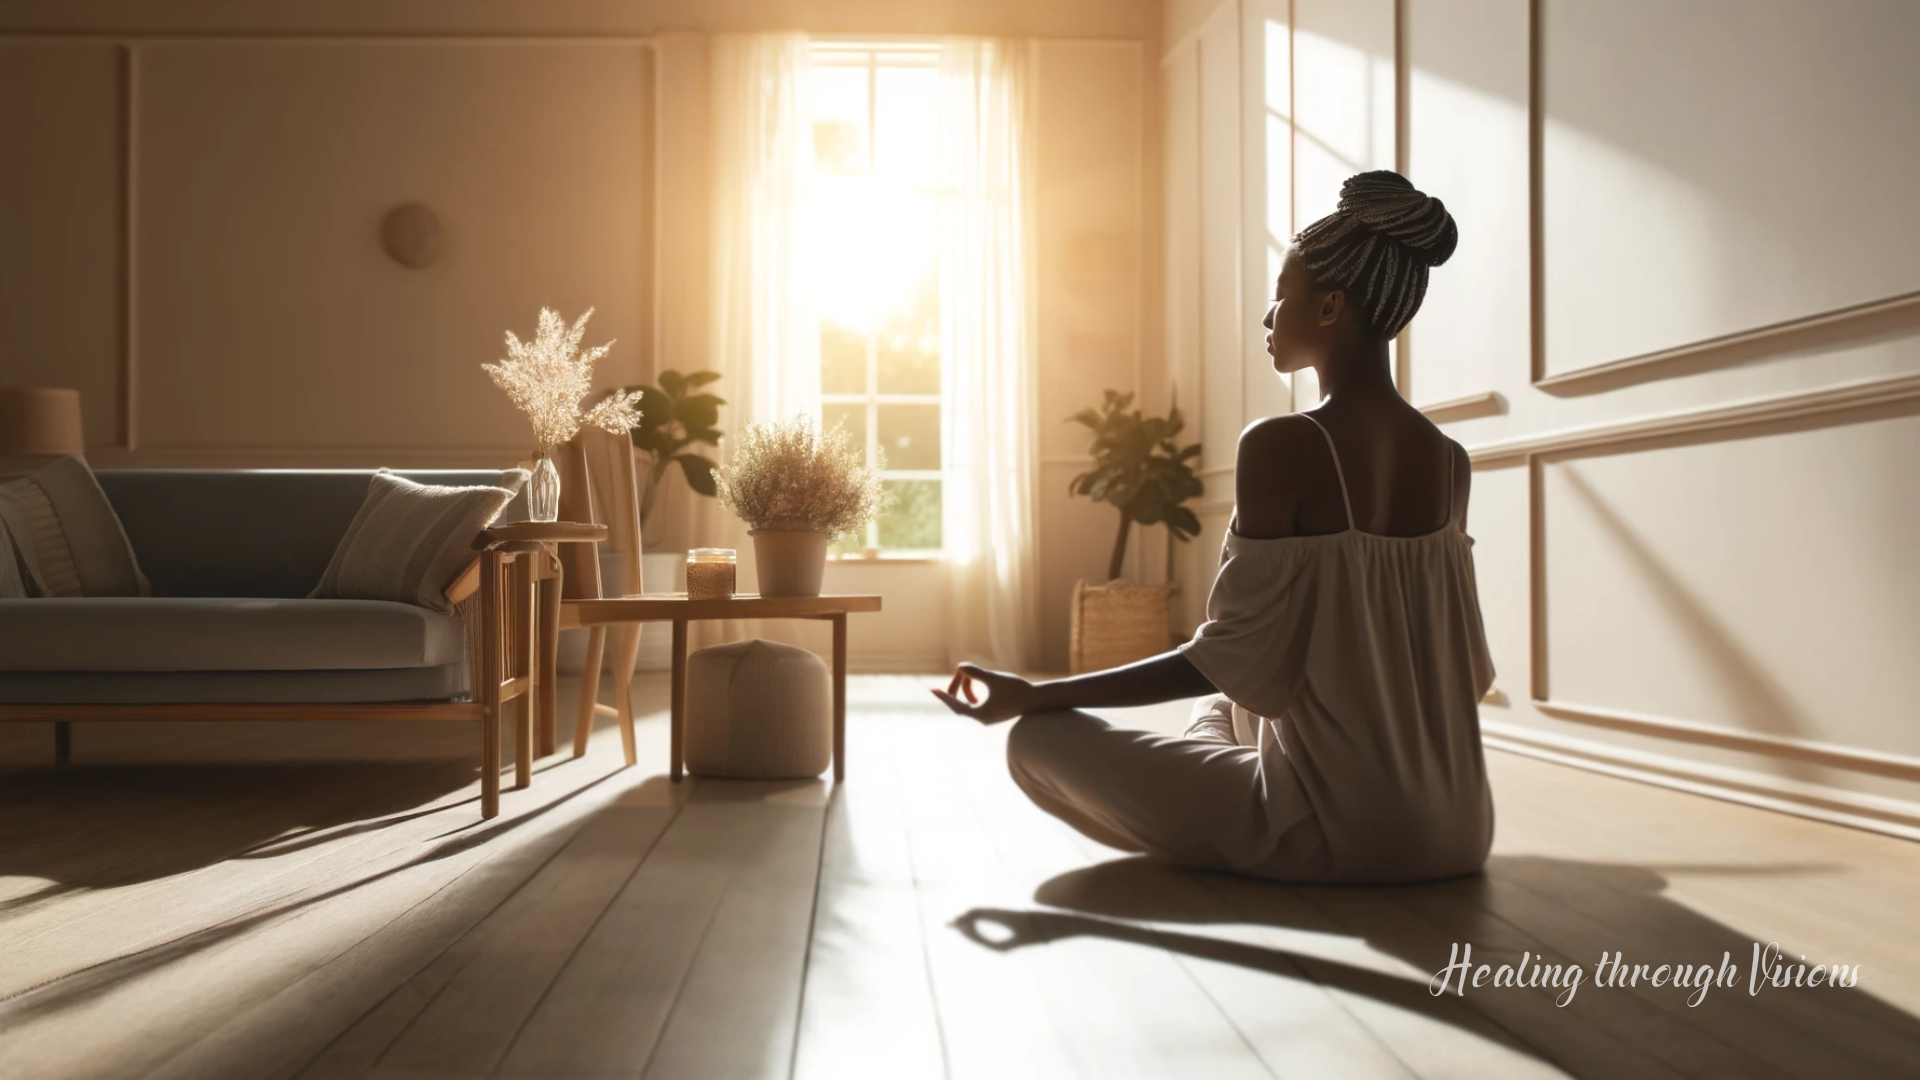 Healing through Visions - Morning Light Meditation is a serene room bathed in morning light, with a Black woman seated in meditation. Her energy reflects tranquility and peace, to encourage a positive start to the day. The room features simple, elegant decor with plants and soft colors, embodying a calming atmosphere.